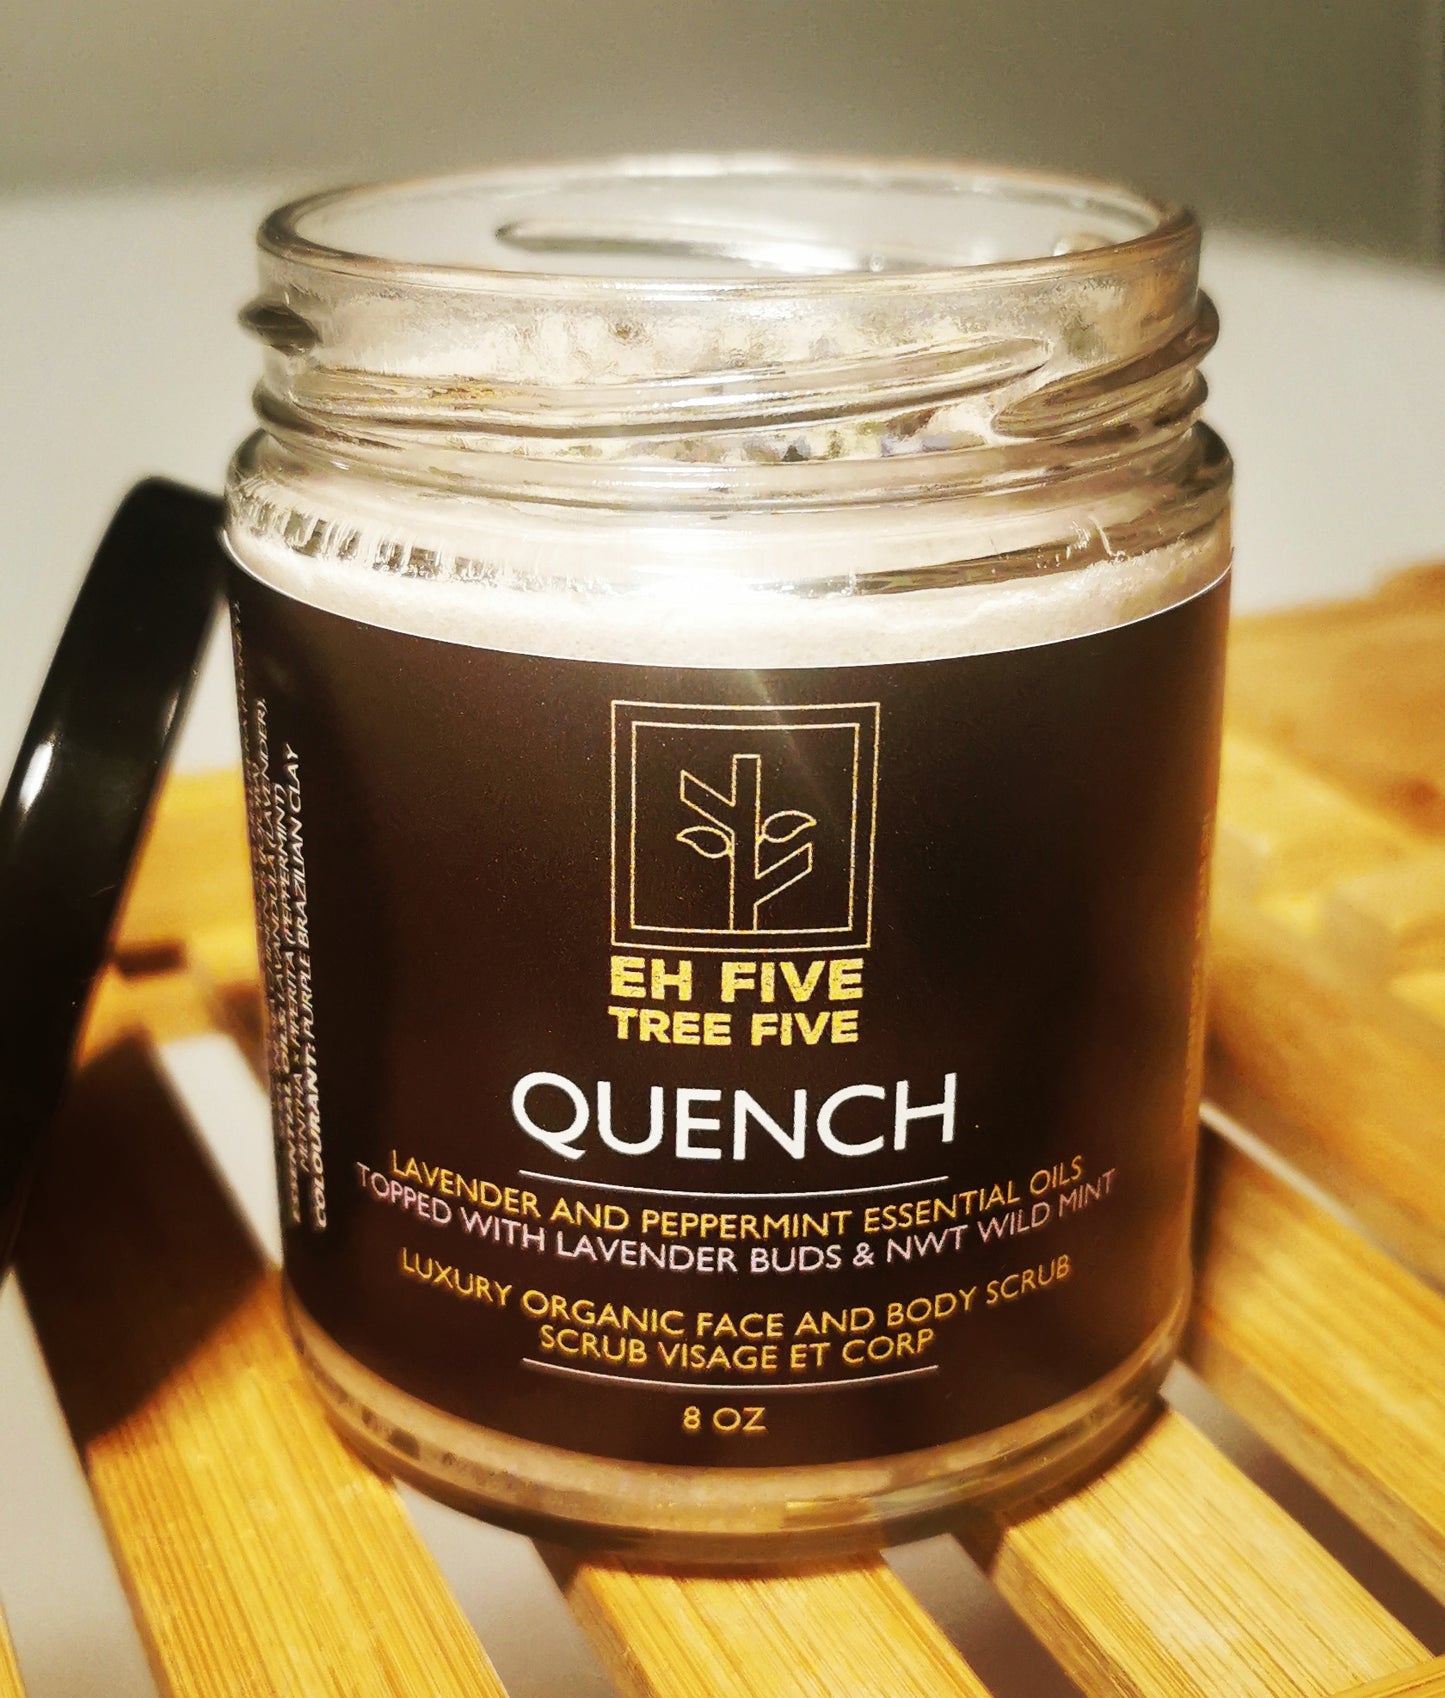 Quench (Lavender and Peppermint) Luxury Face and Body Scrub